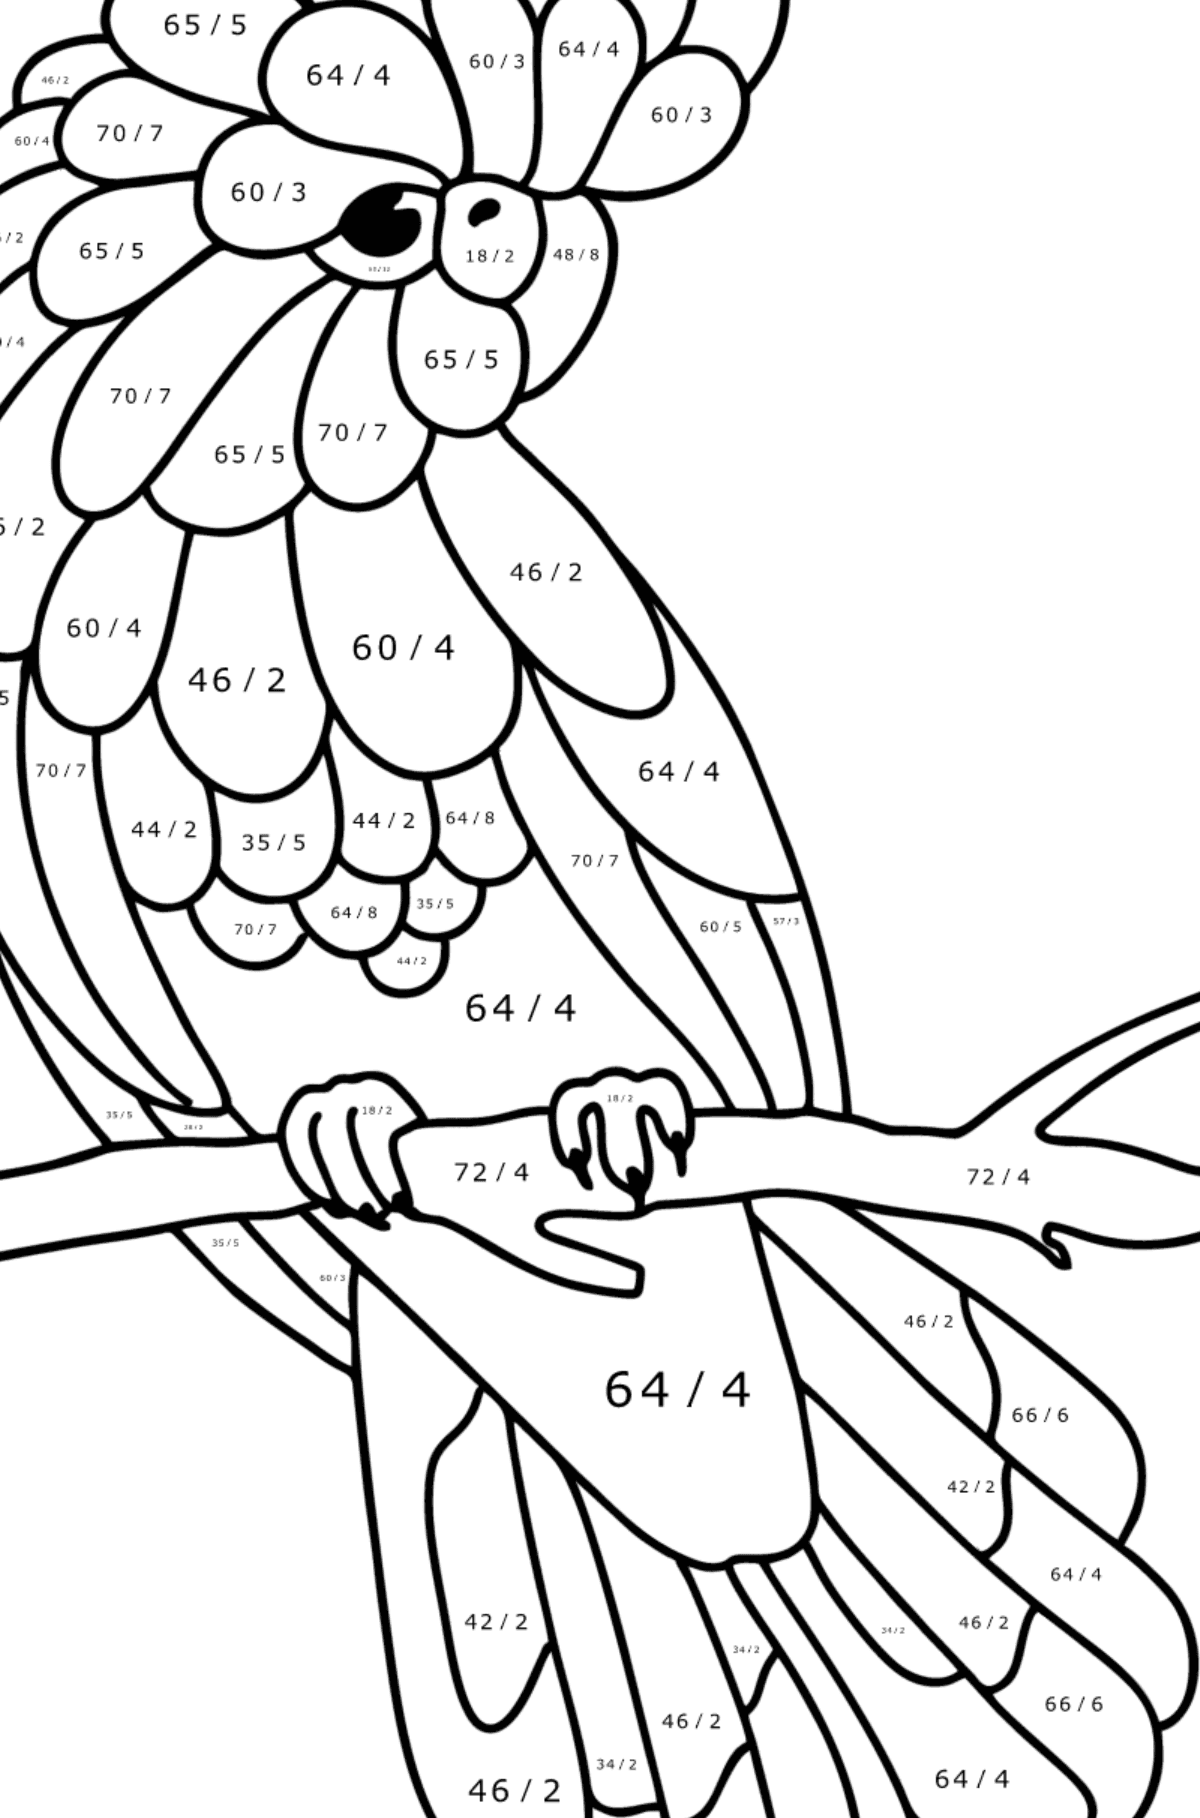 Black cockatoo сoloring page - Math Coloring - Division for Kids